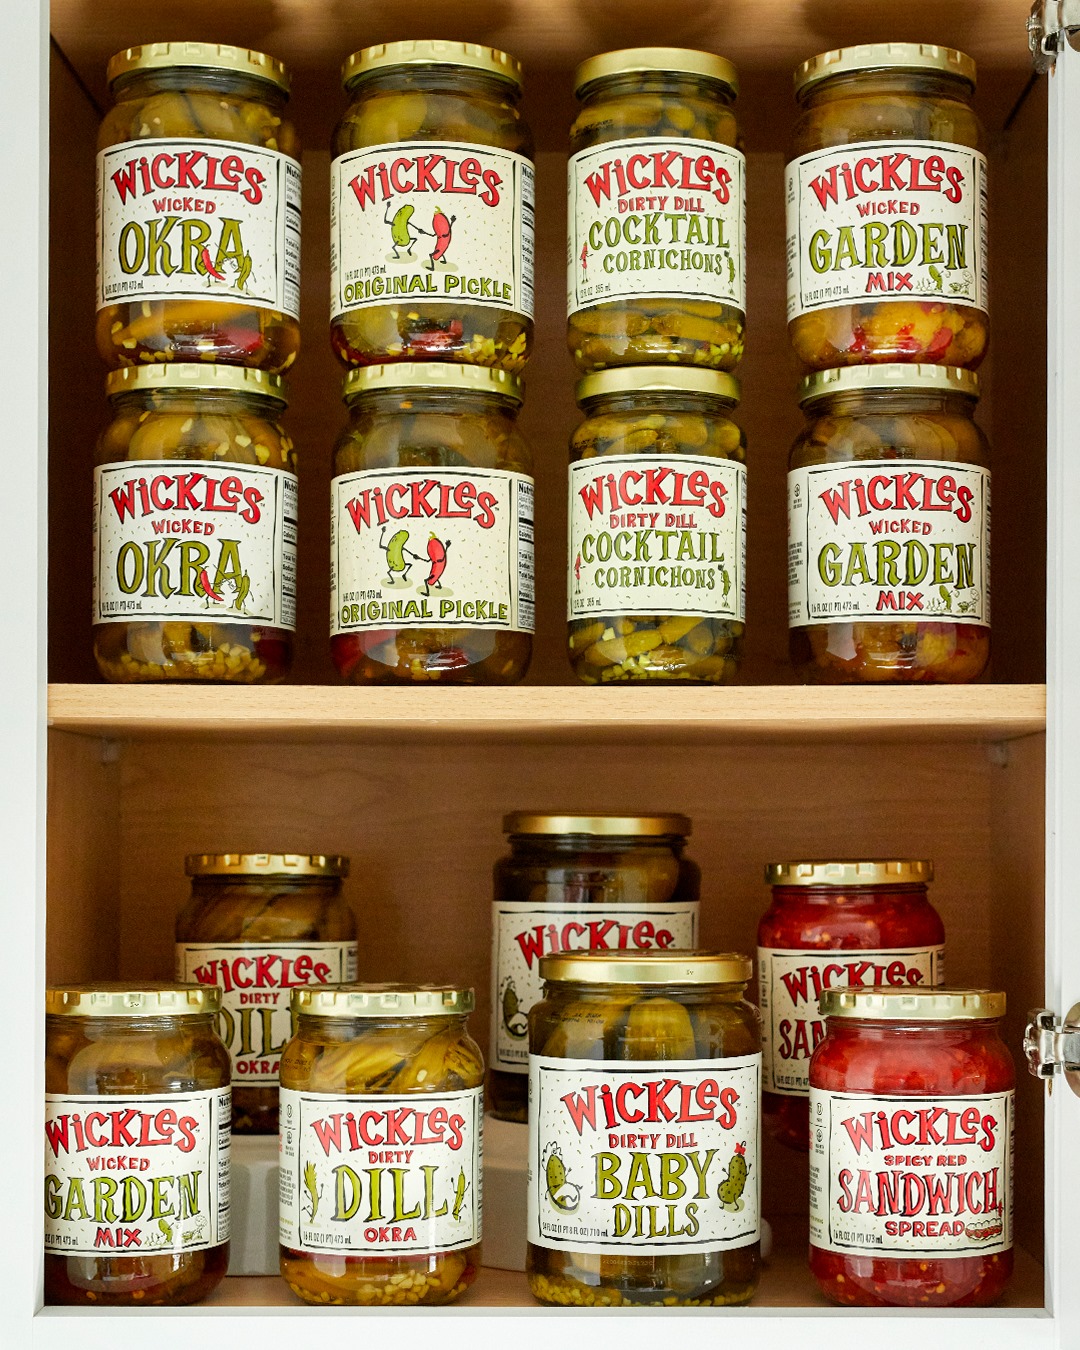 Wickles Pickles is becoming one of Alabama's most delicious exports -  SoulGrown